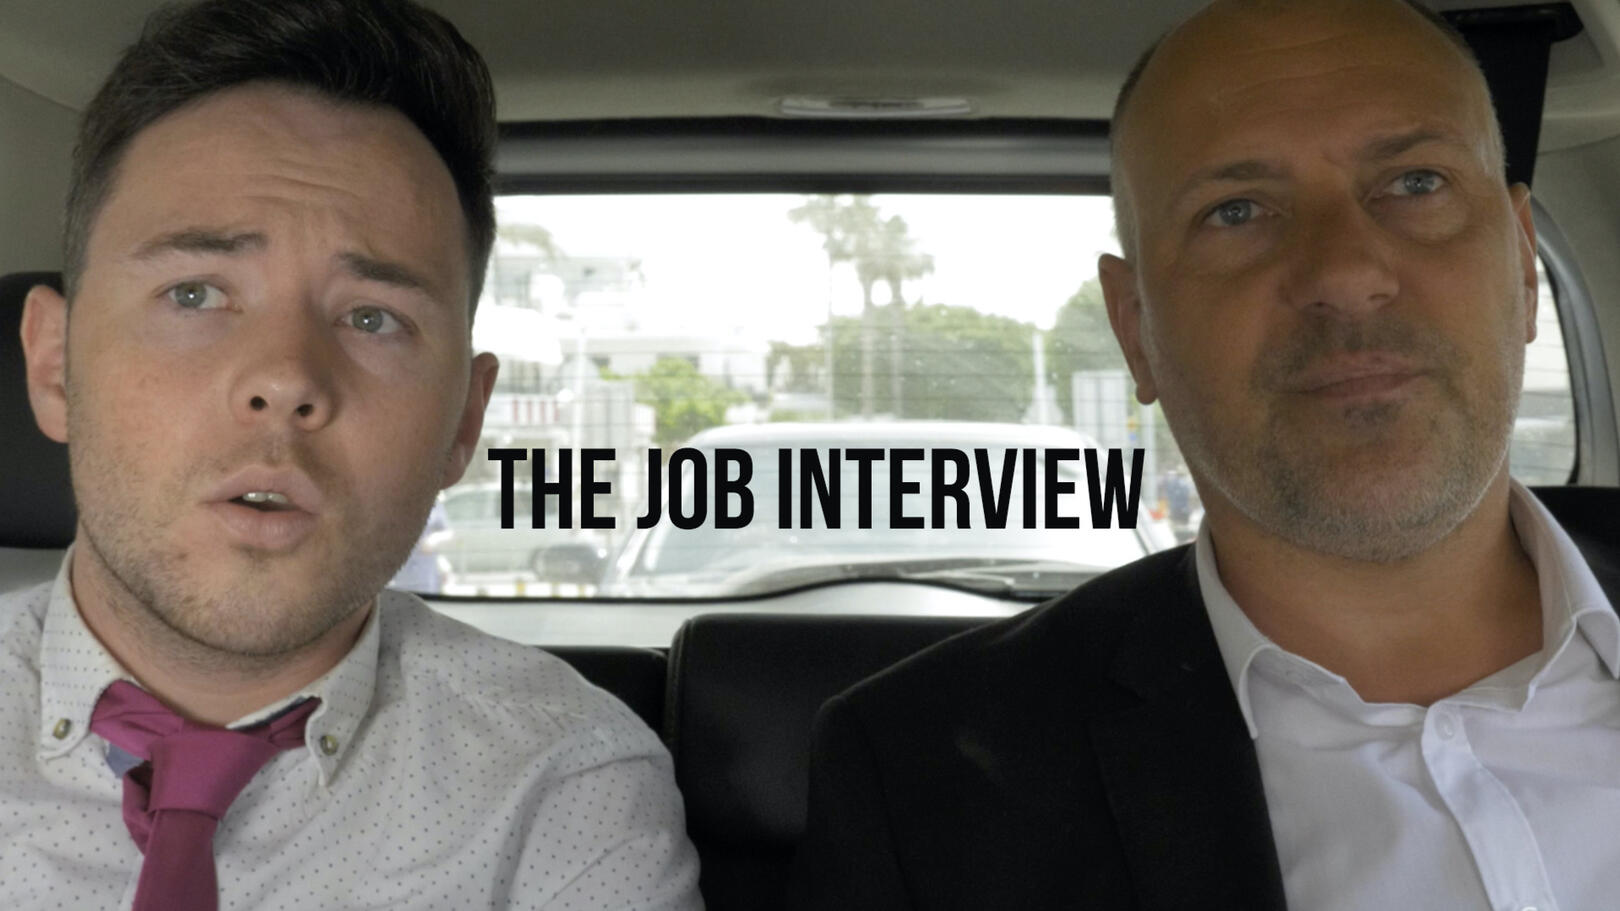 Watch The Job Interview on Youtube